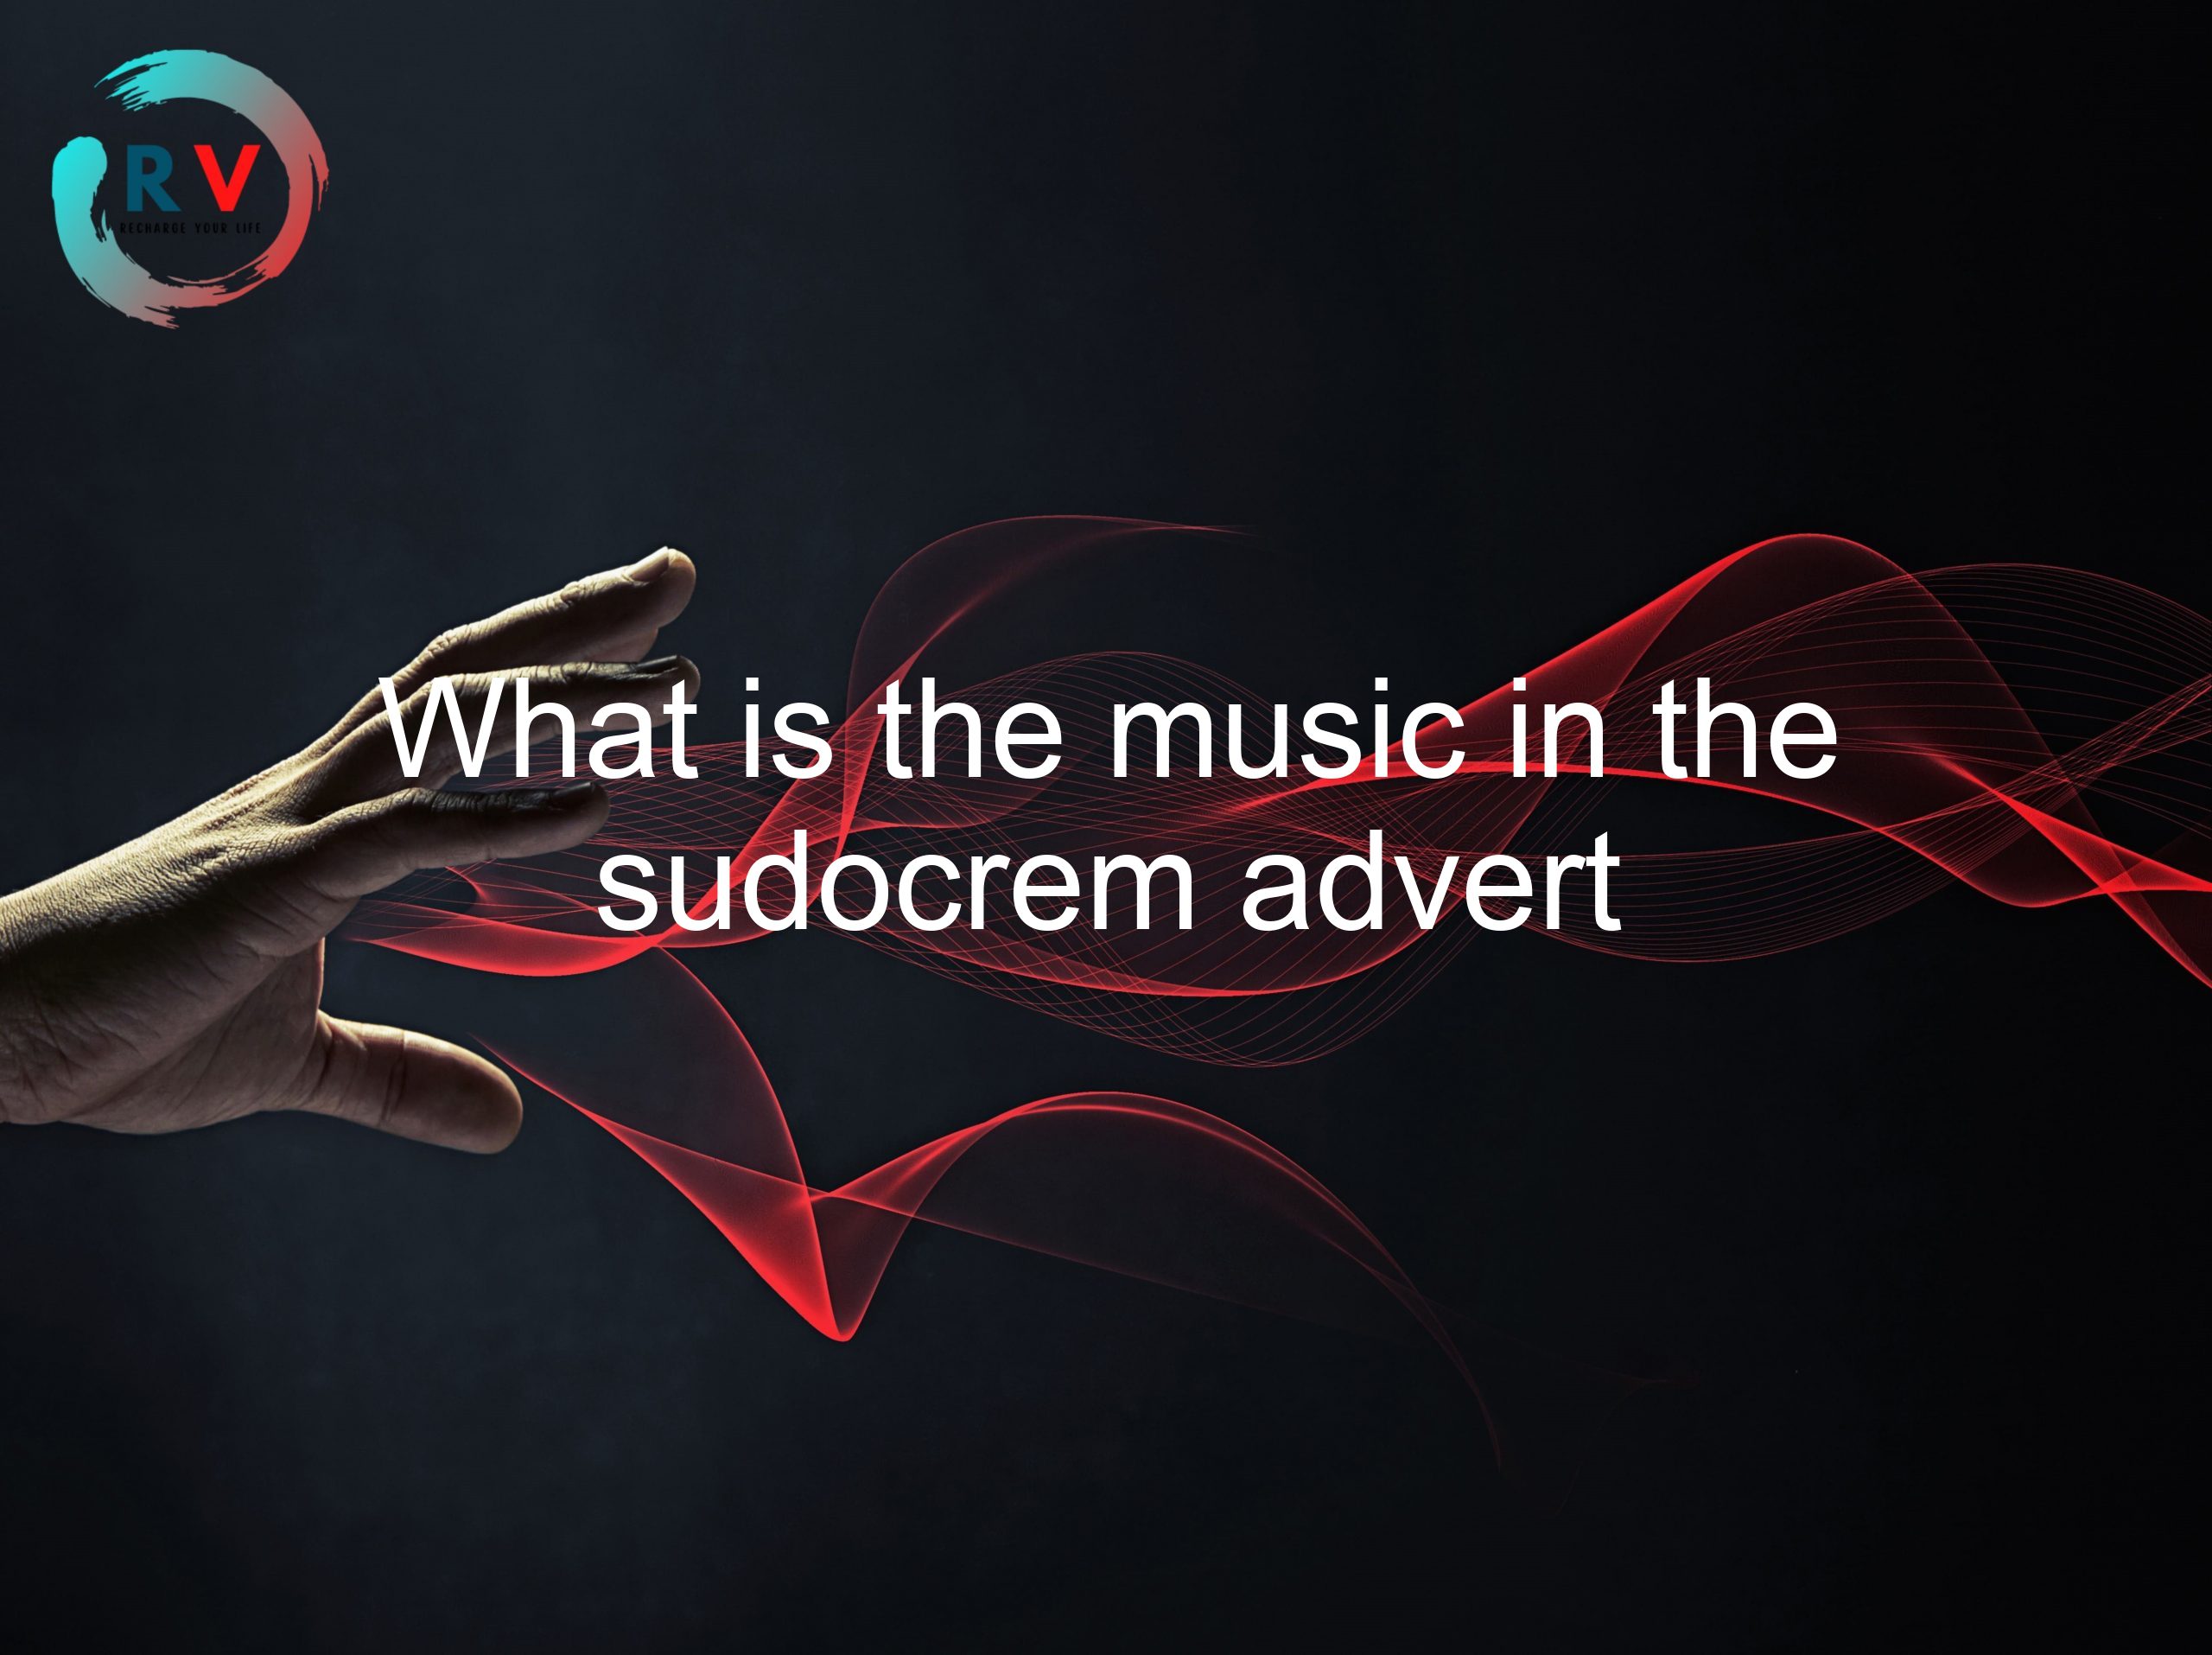 What is the music in the sudocrem advert